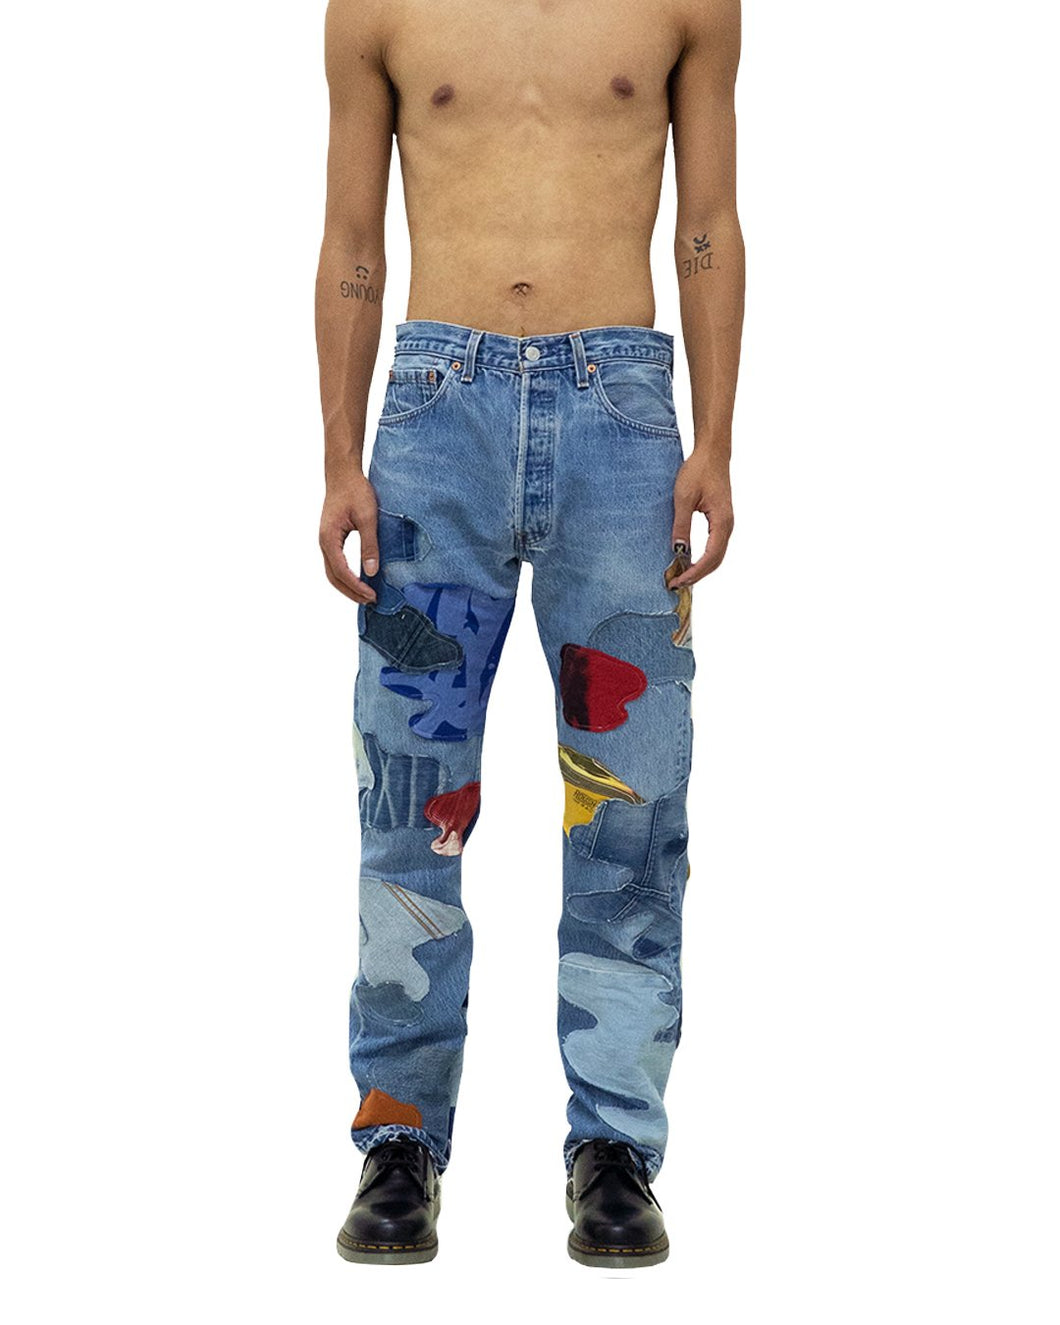 RANDOM EFFECT “Camouflage lovers” jeans